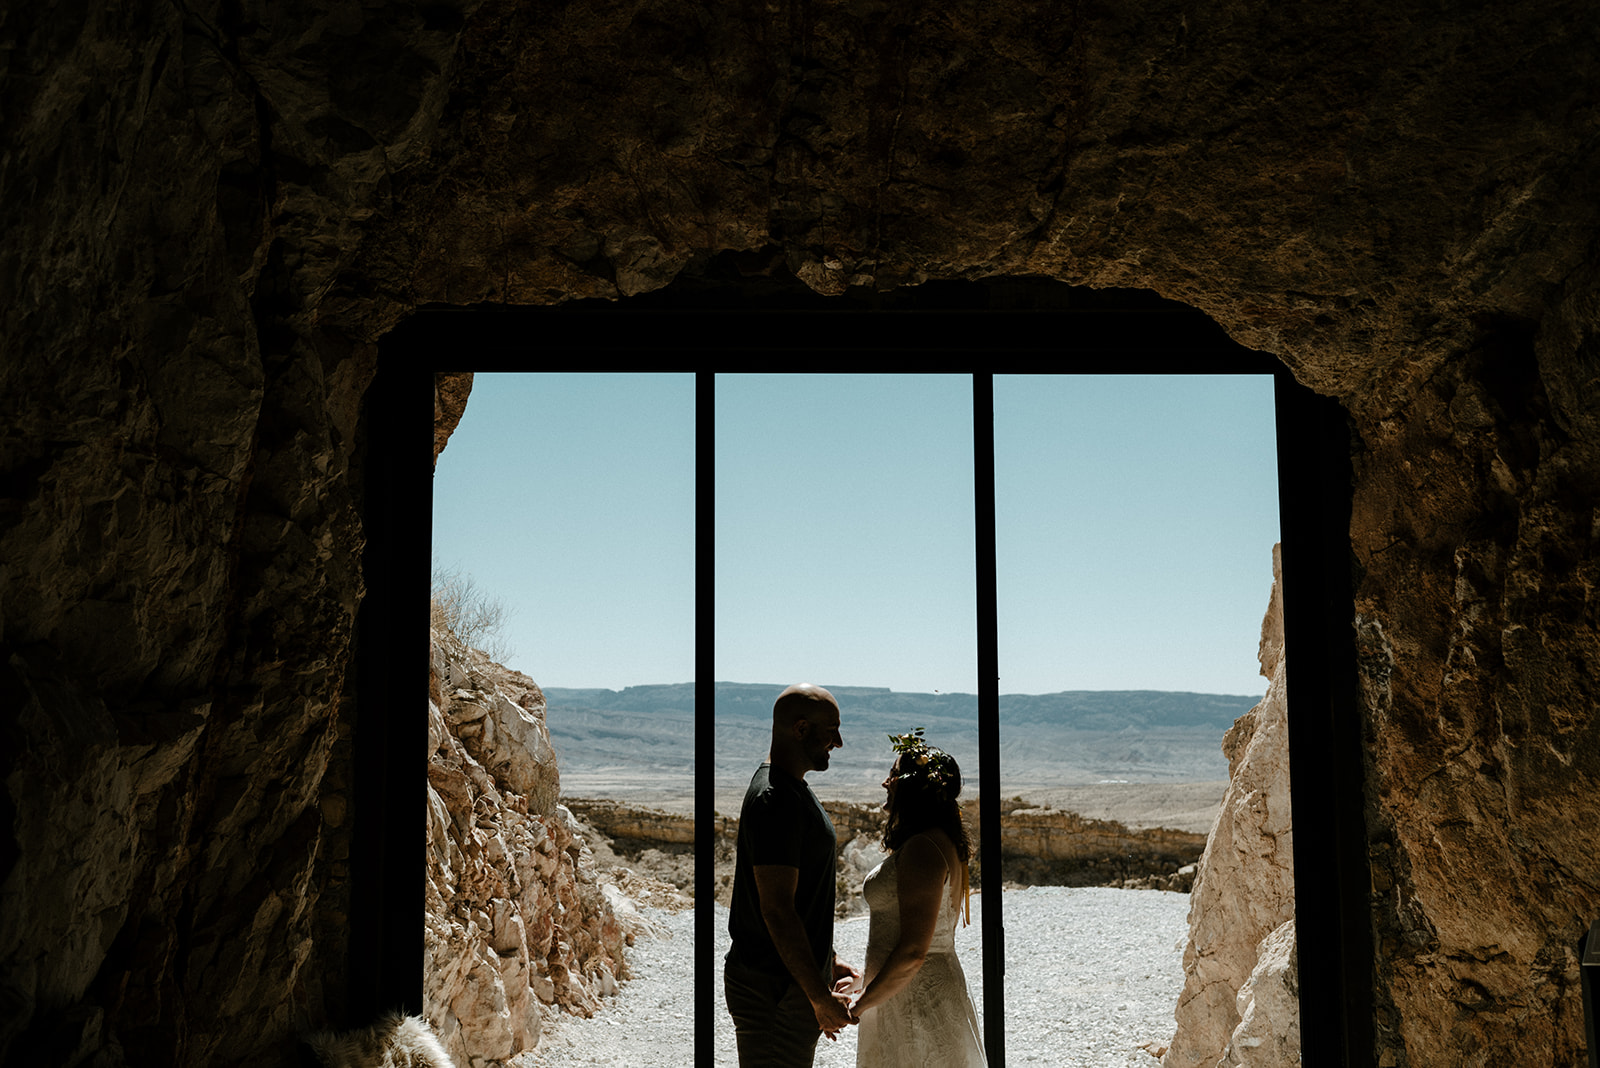 The caves at the summit, are the perfect stay for eloping couples